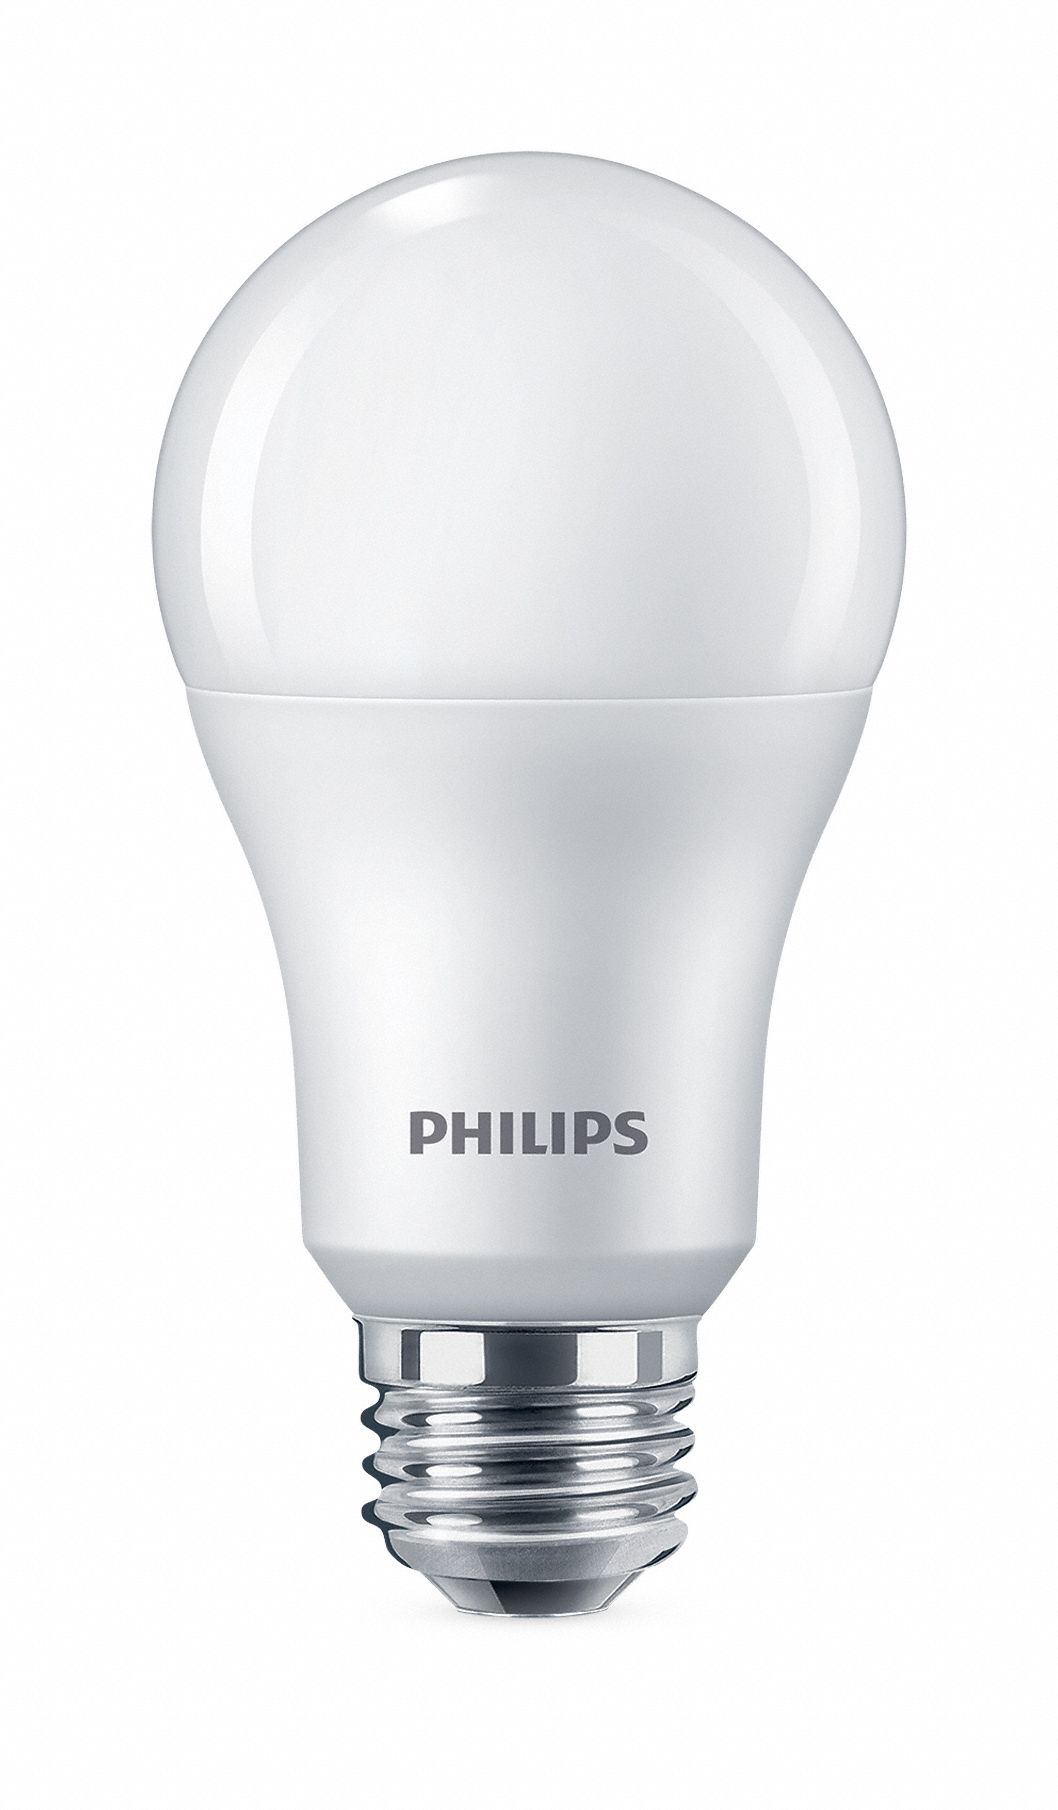 park Bruin Individualiteit PHILIPS, A19, Medium Screw (E26), LED Lamp Replacement - 784N97|13.5A19/LED/927/FR/P/ND  4/1FB - Grainger